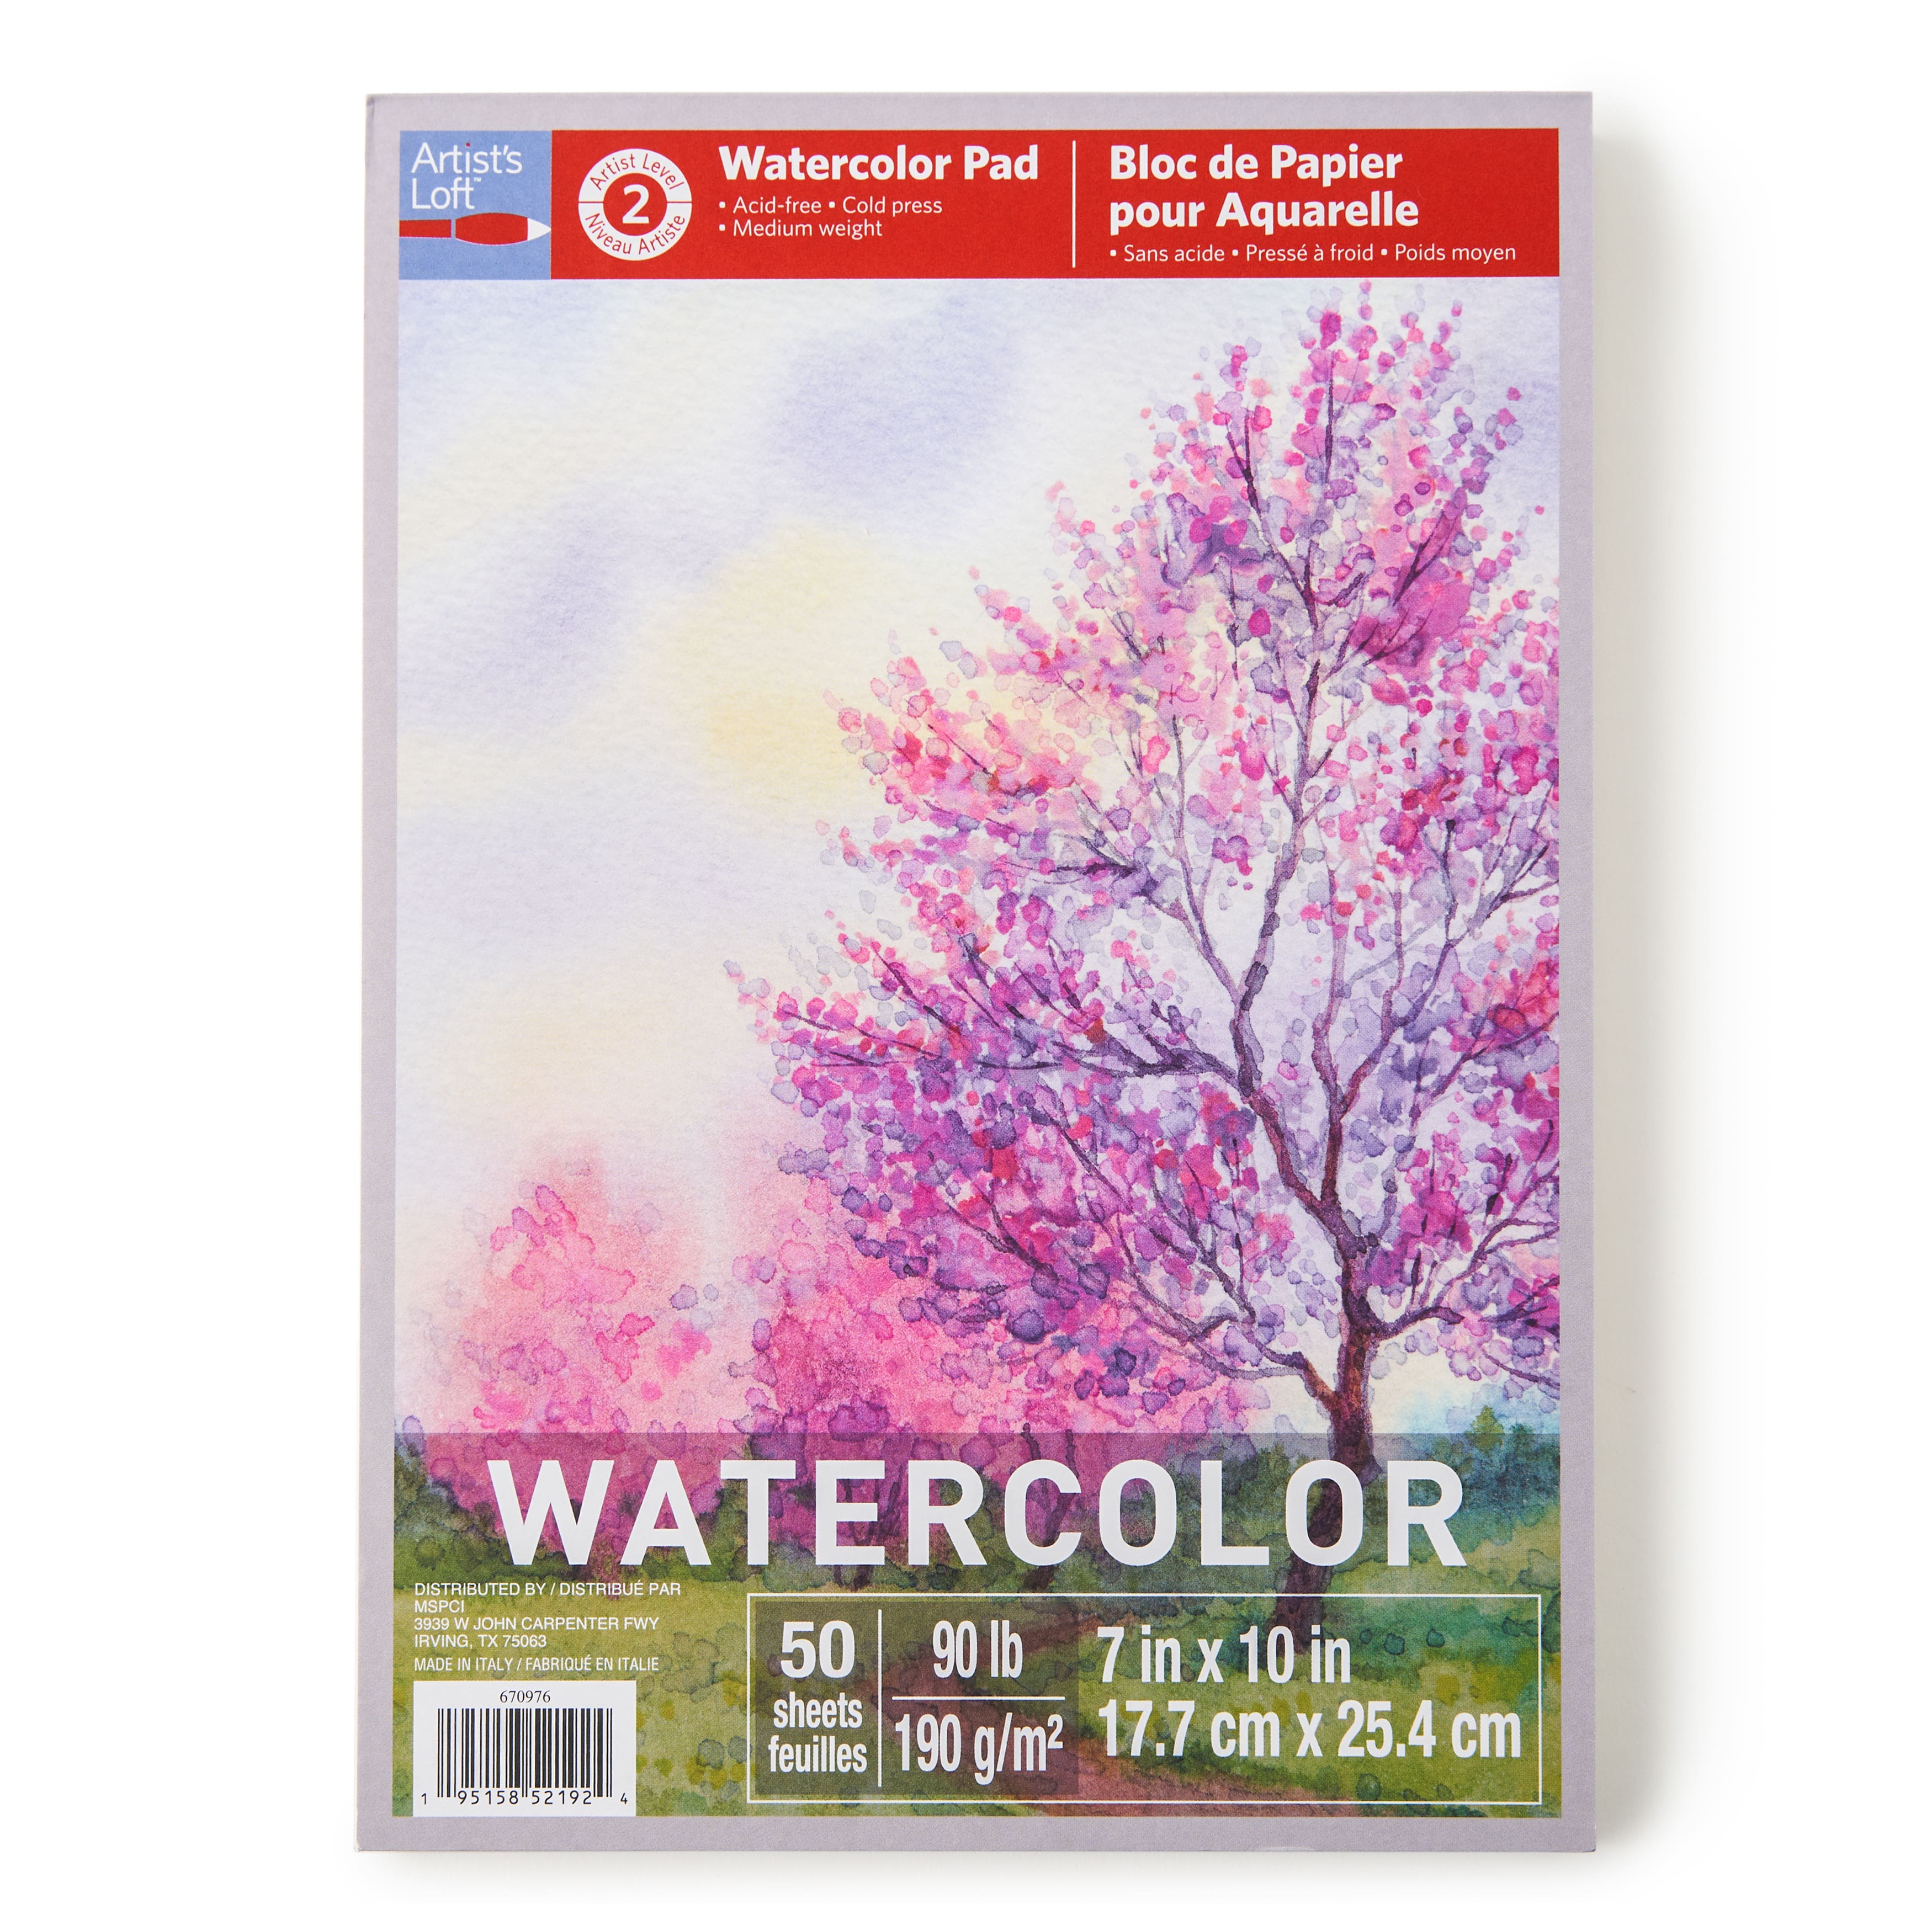 15 Pack: Watercolor Pad by Artist's Loft™, 7 x 10